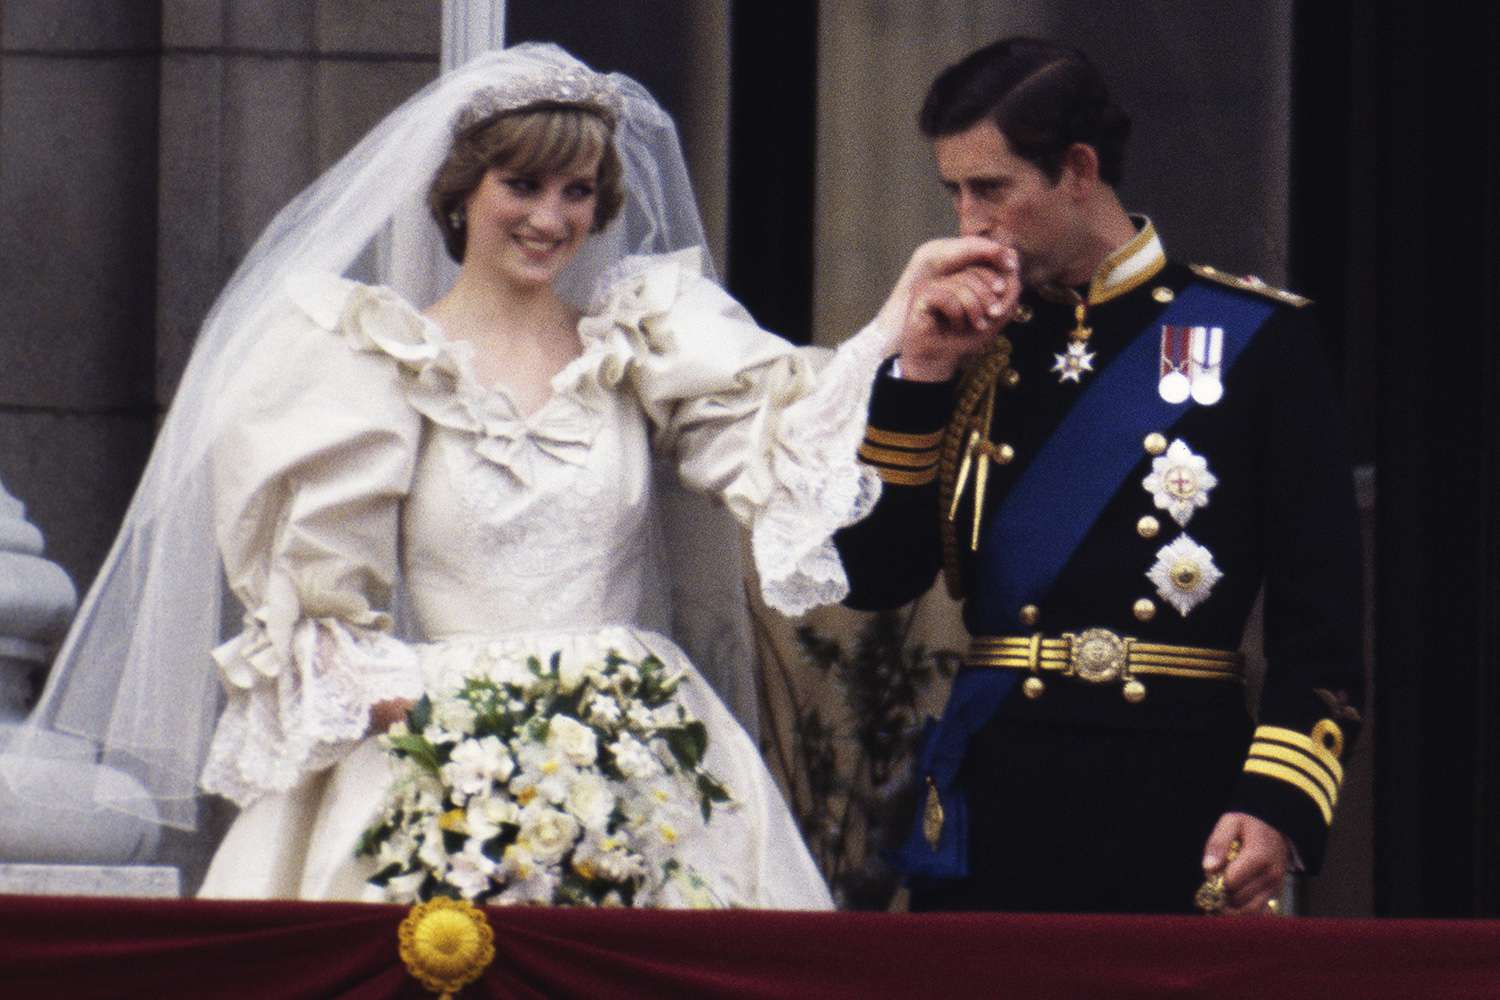 wedding of prince charles and lady diana spencer